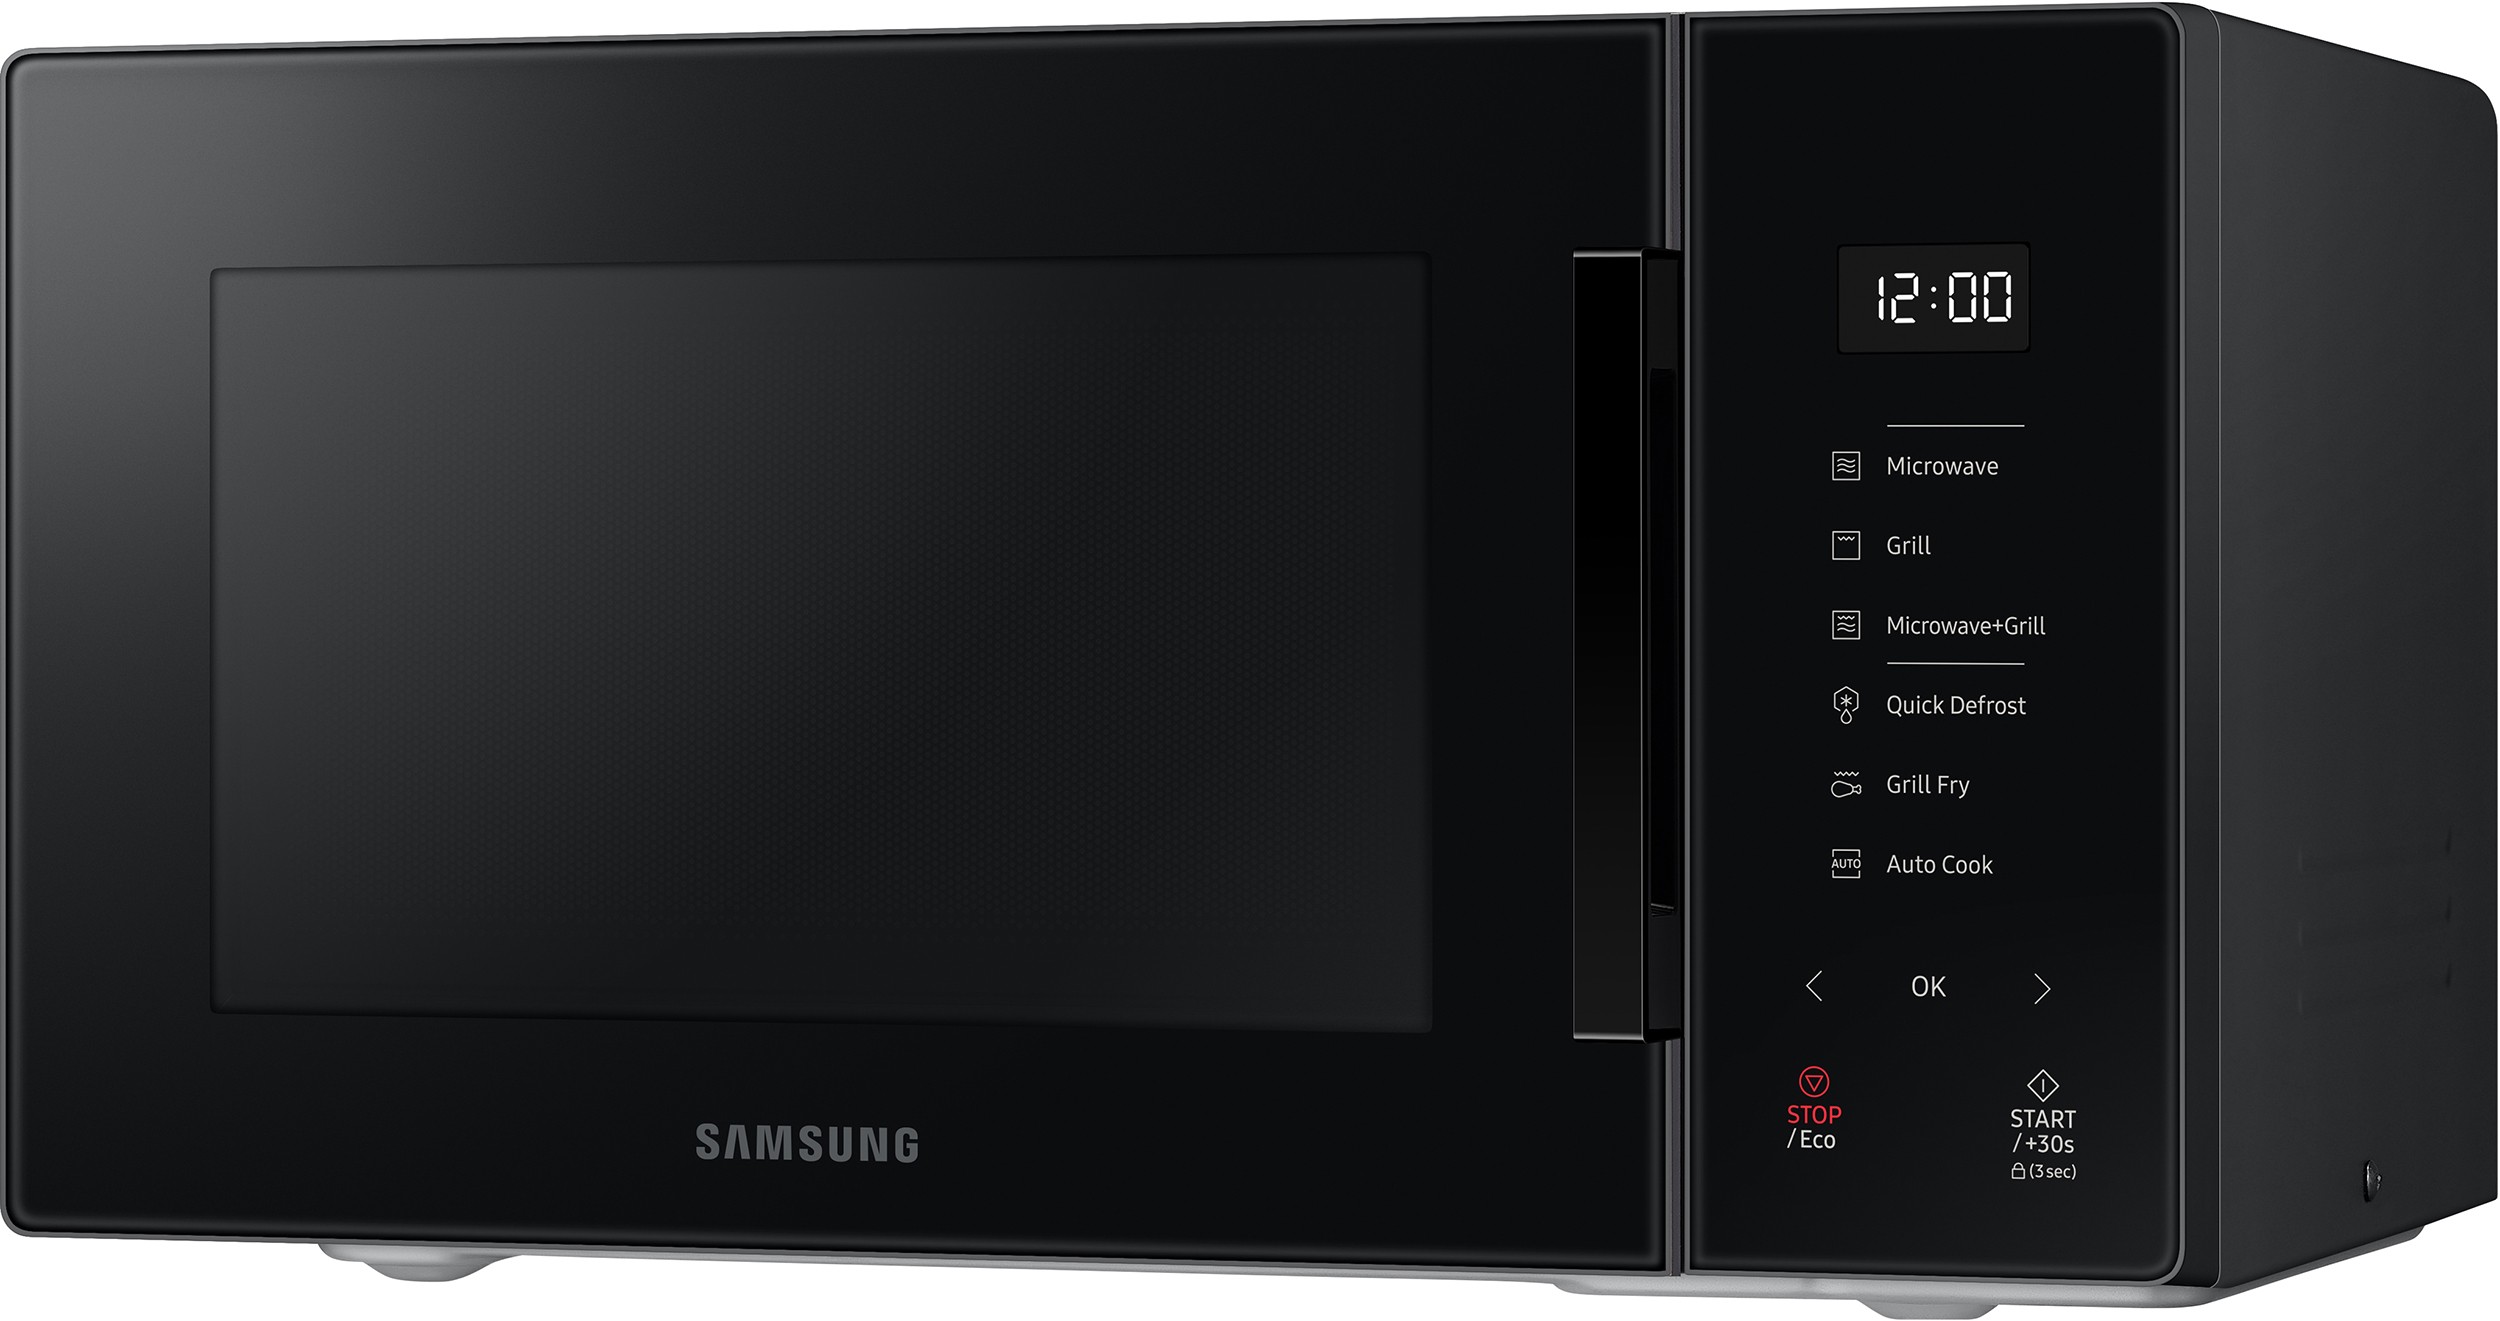 SAMSUNG Micro ondes Grill  - MG23T5018CK